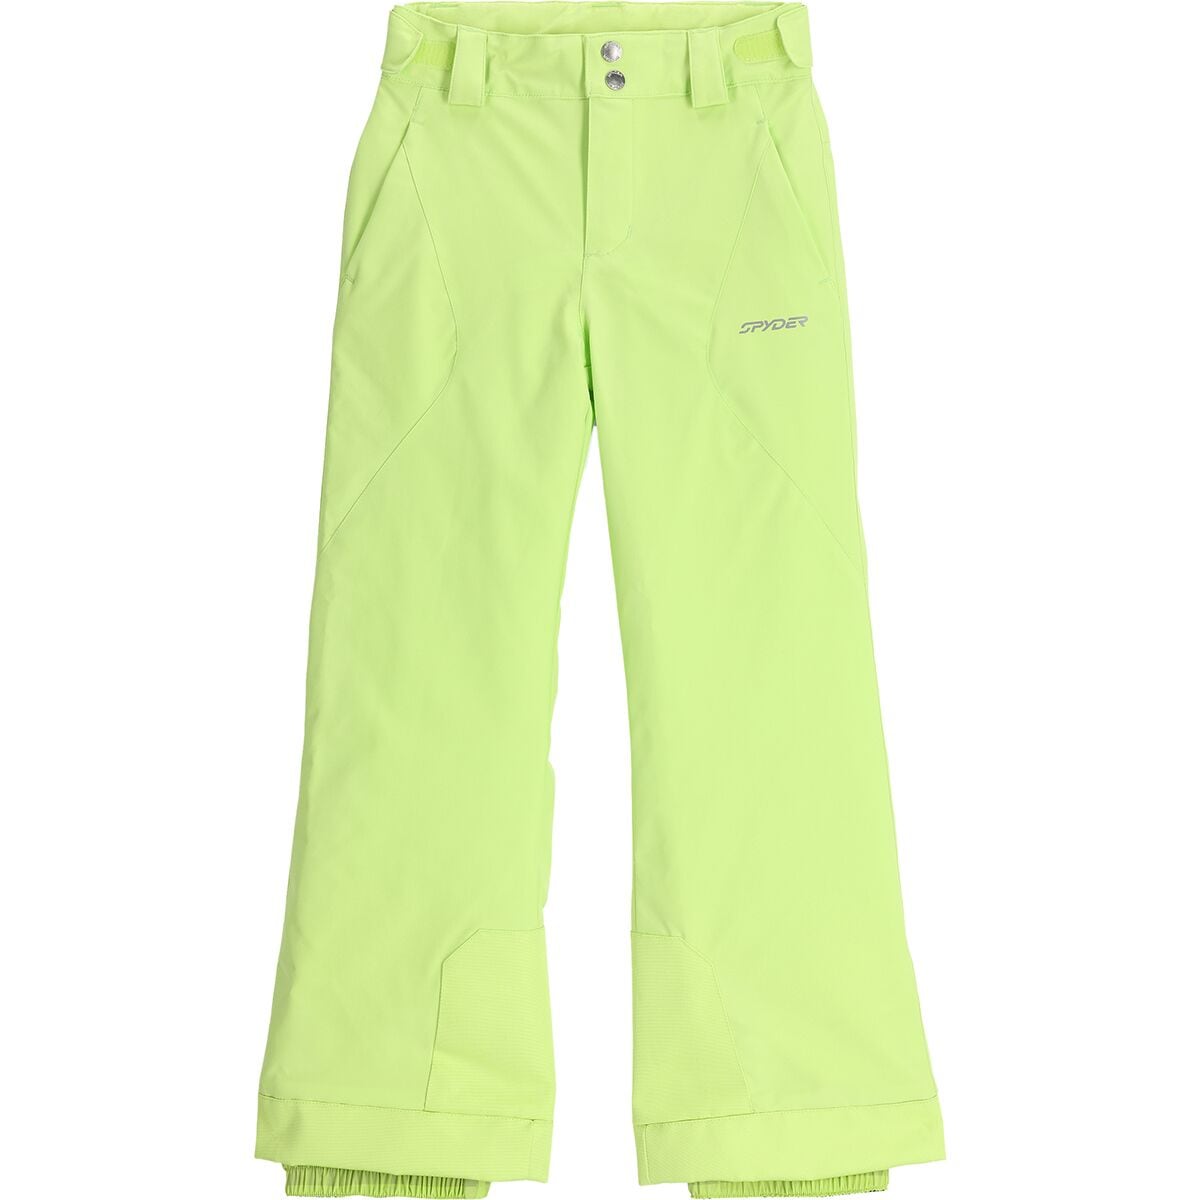 Spyder Olympia Pant - Girls' Lime Ice